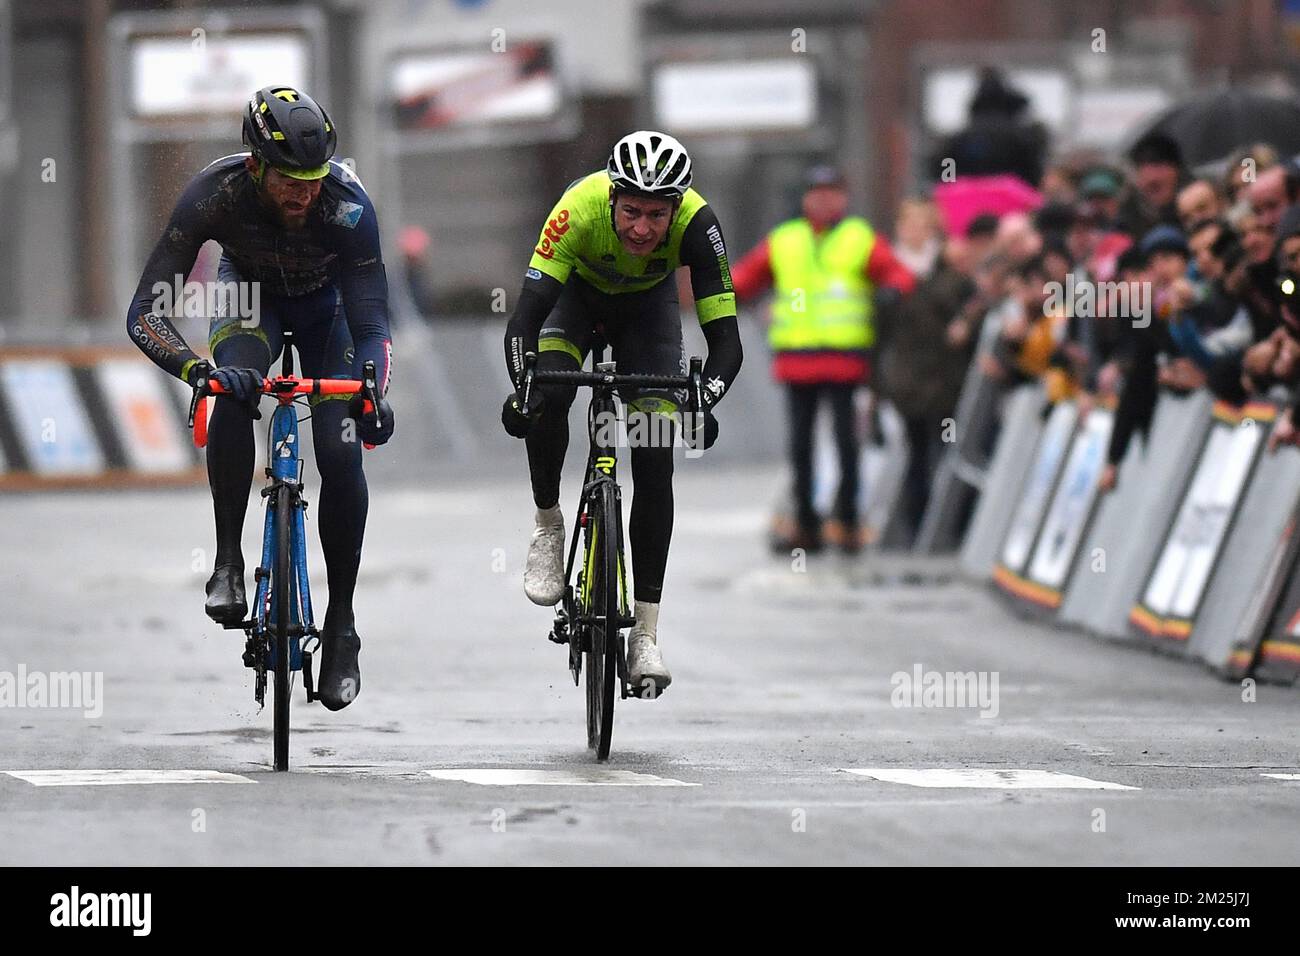 Belgian Guillaume Van Keirsbulck of Wanty-Groupe Gobert and Luxembourgian Alex Kirsch of WB Veranclassic Aqua Protect sprint for the finish of the 49th edition of the Grand Prix du Samyn cycling race, Wednesday 01 March 2017. The race starts in Quaregnon and ends in Dour (202,6km). The Grand Prix du Samyn is also the first round of the Napoleon Games Cup. BELGA PHOTO DAVID STOCKMAN Stock Photo